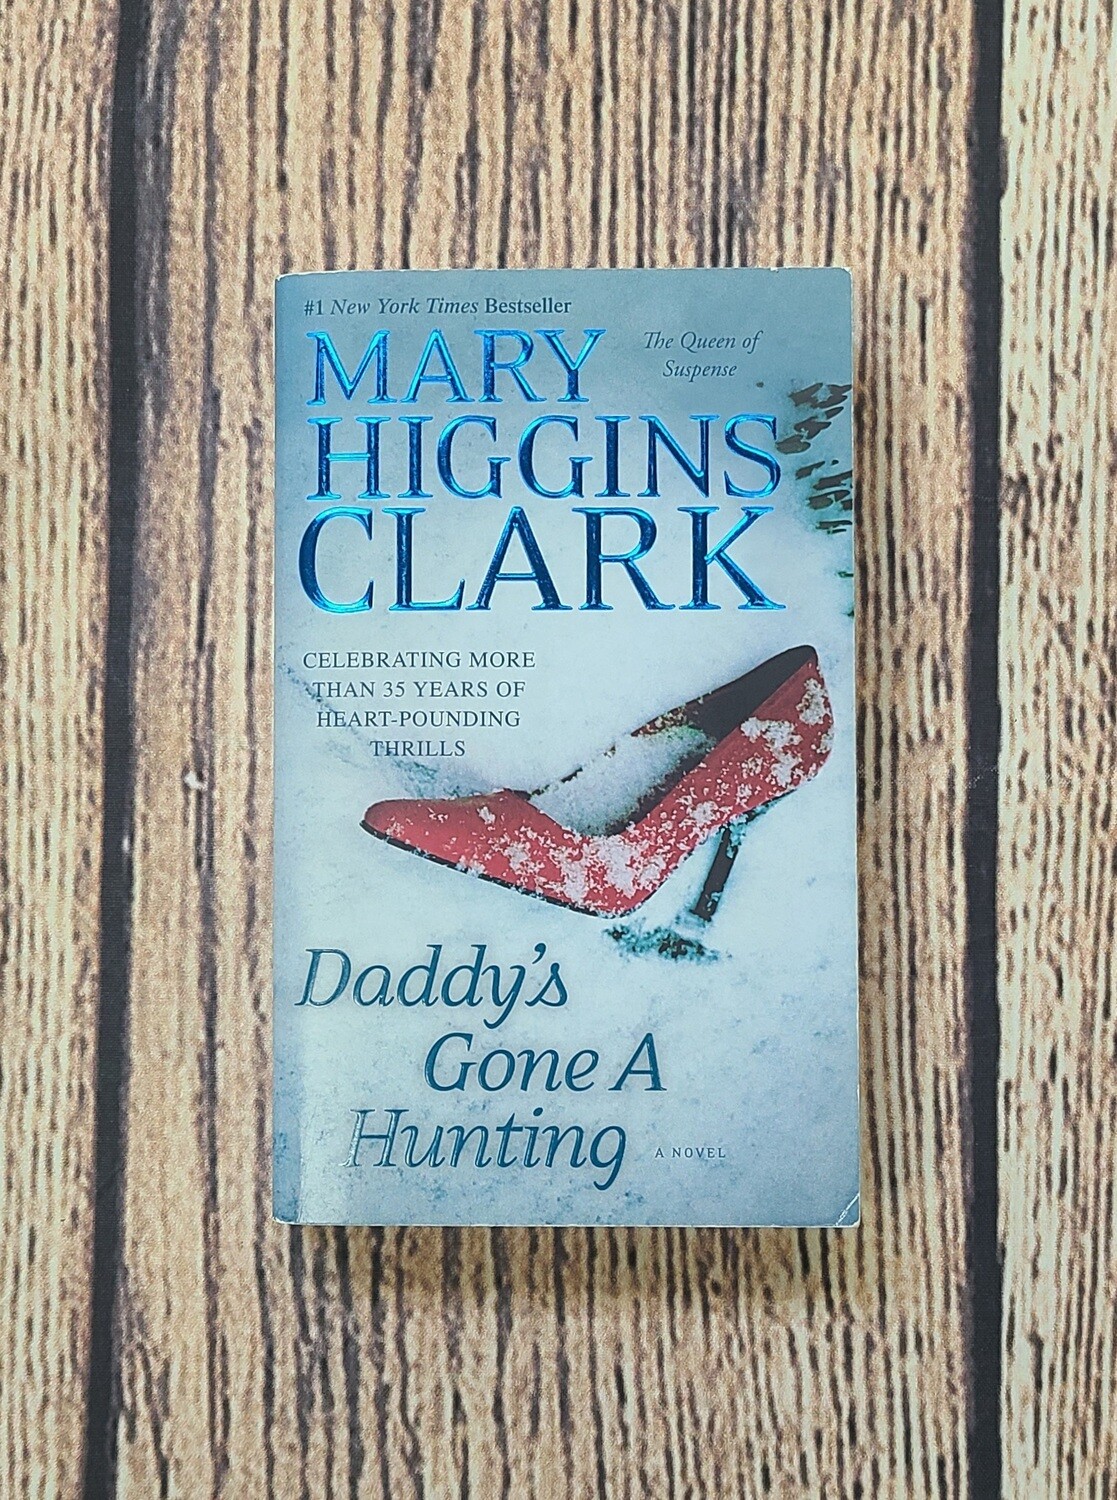 Daddy's Gone A Hunting by Mary Higgins Clark